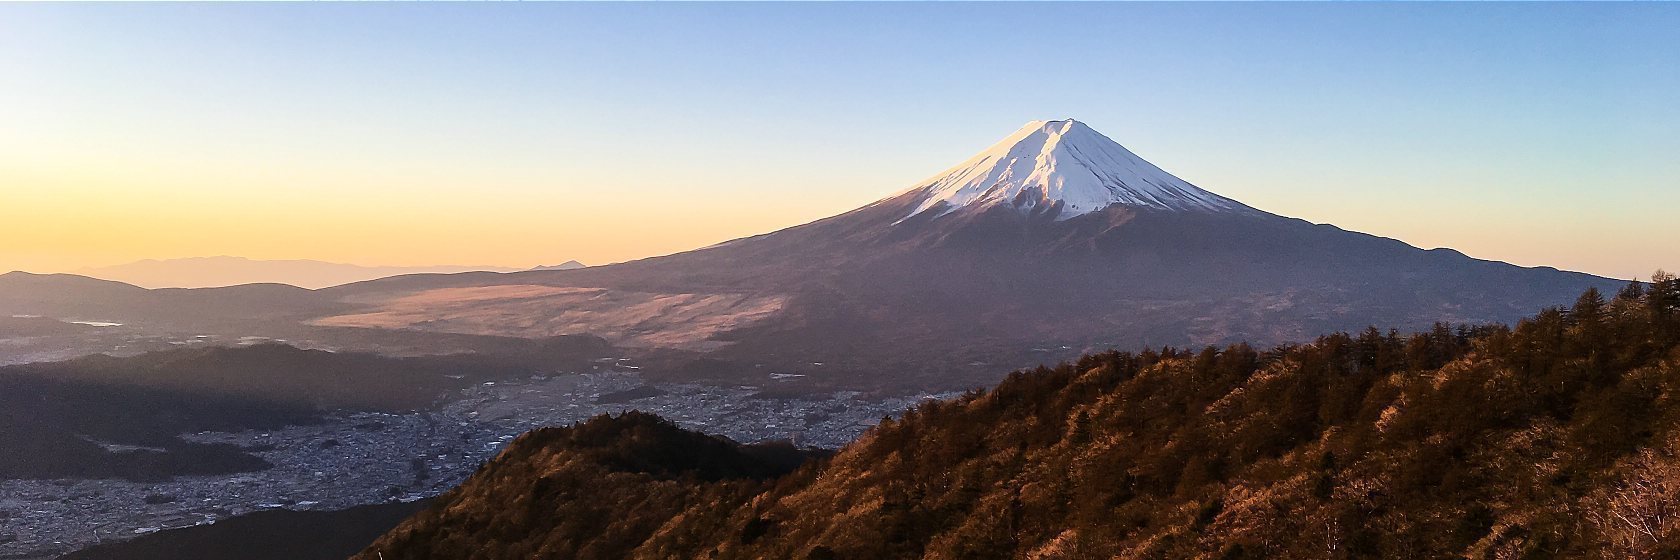 Mount Fuji Travel Guide What To Seen And Do Around Fujisan